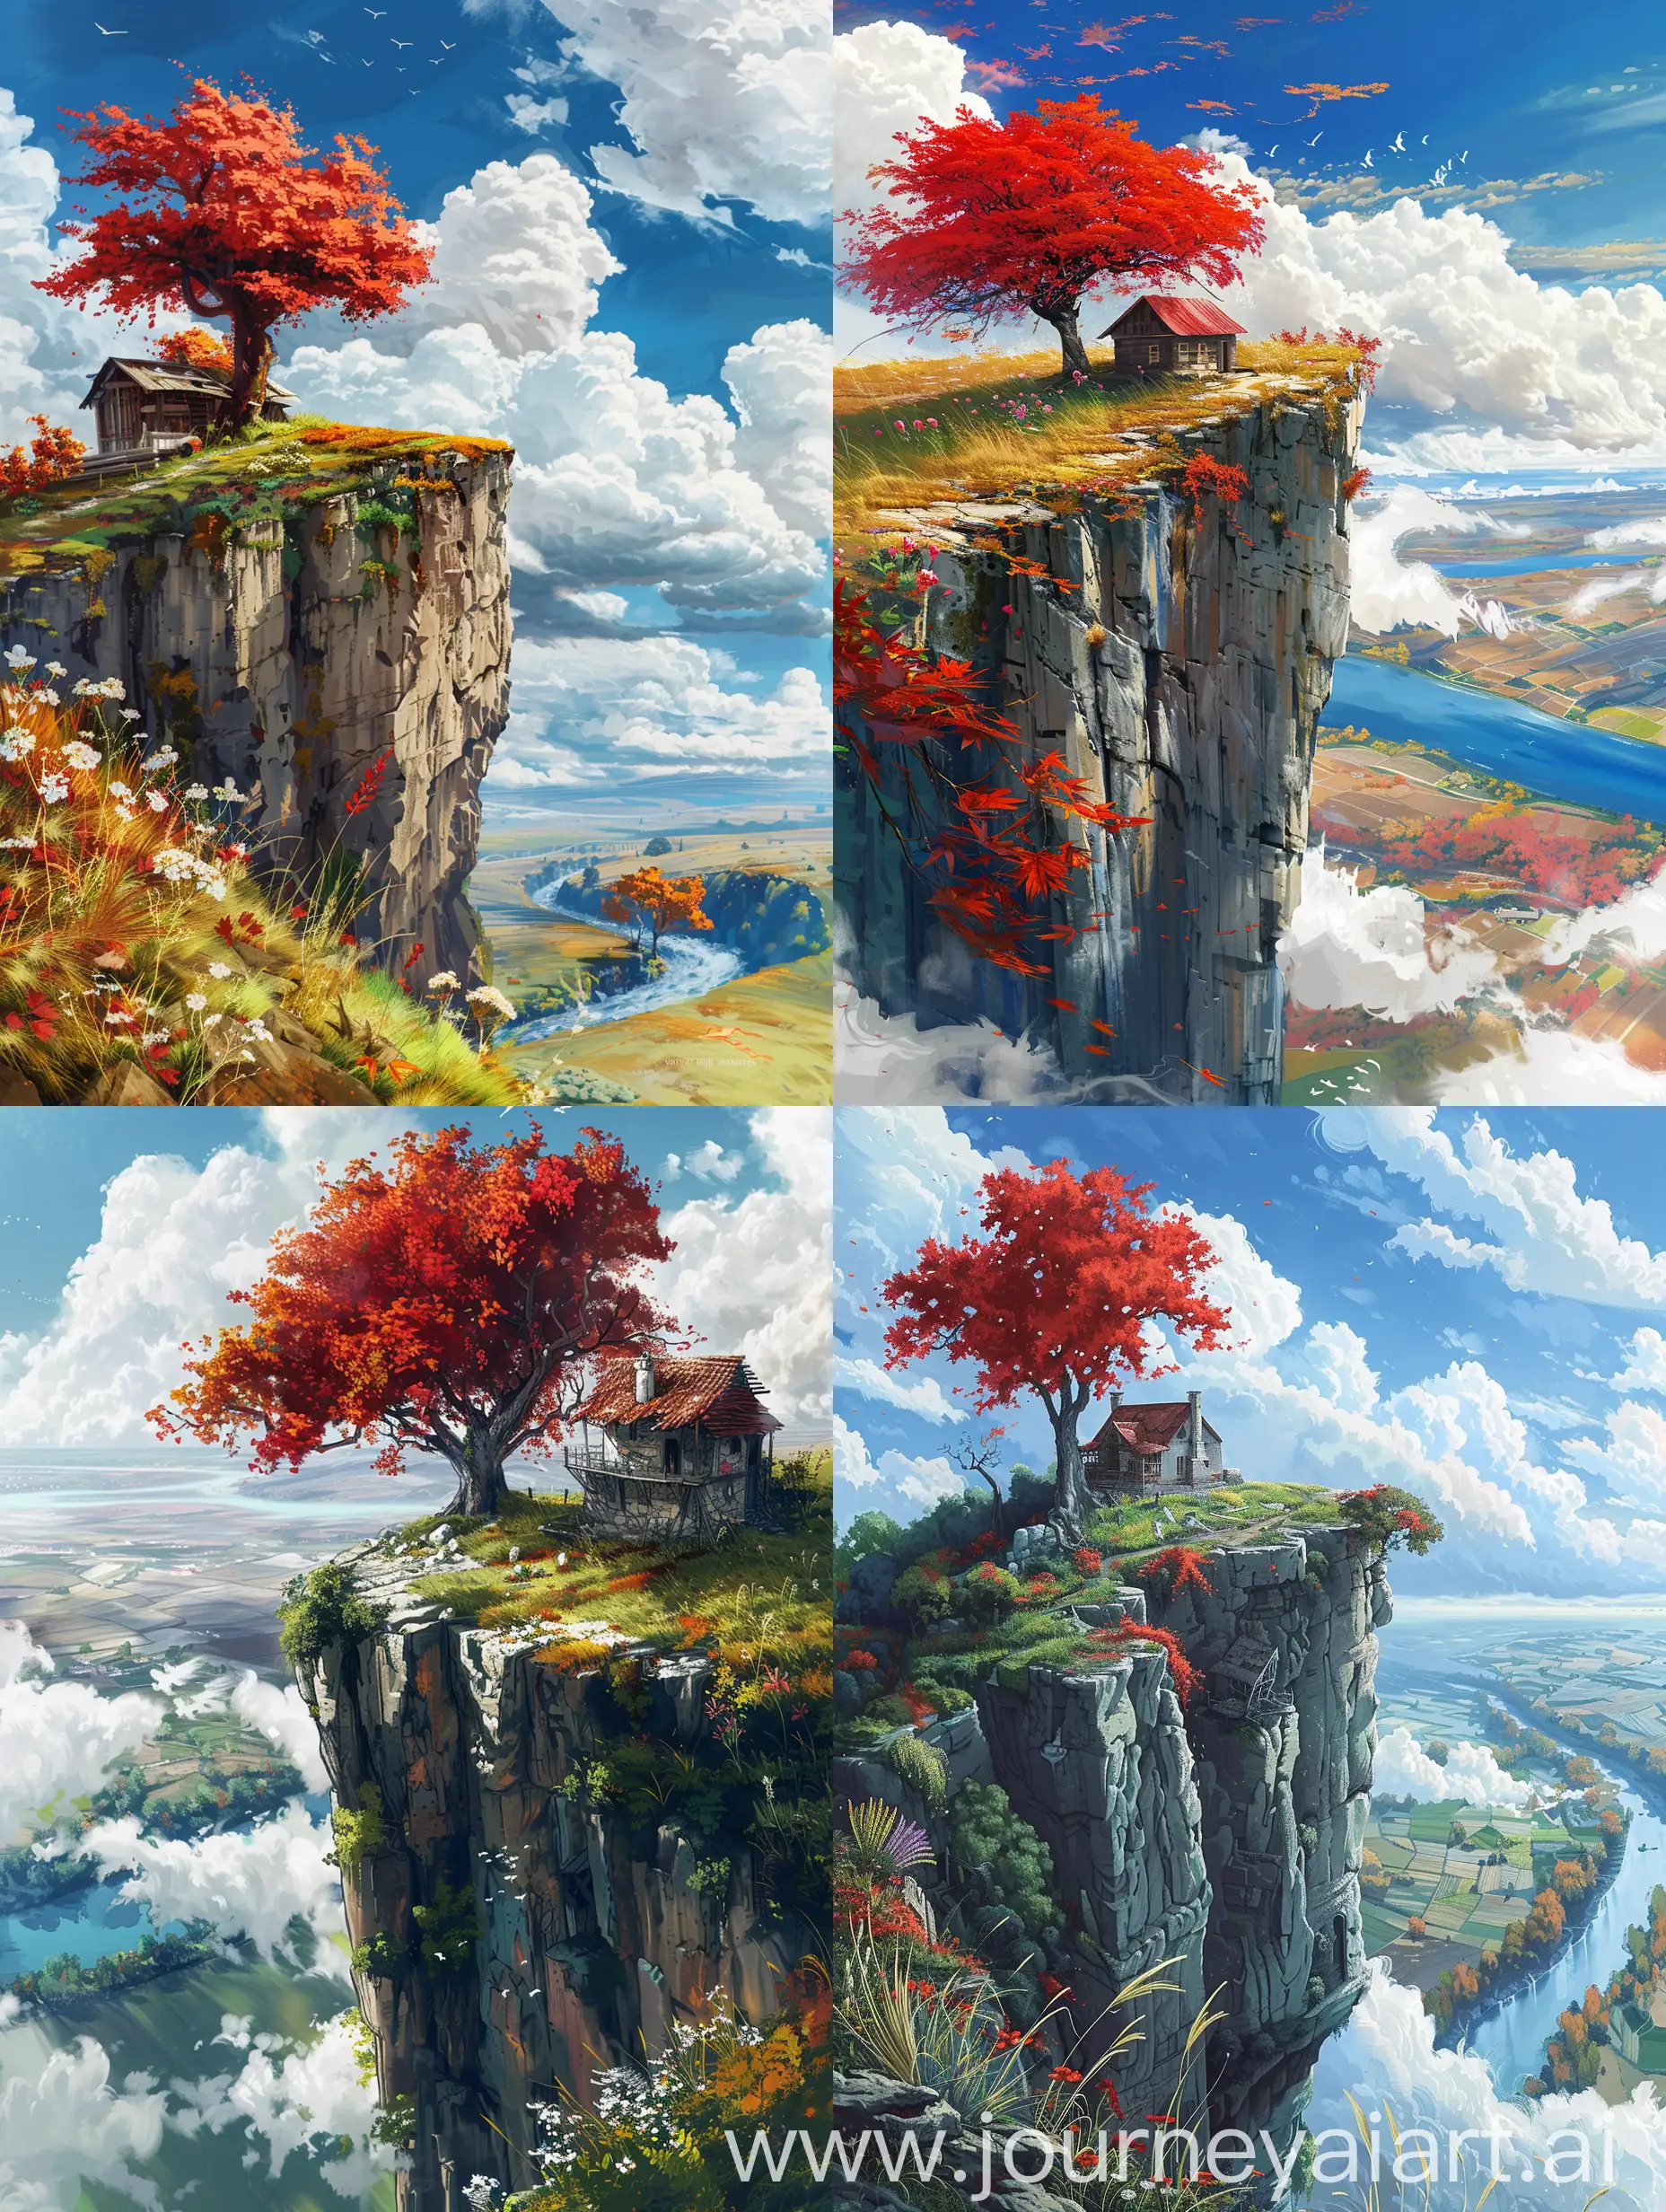 Realism and abstraction painting style of a high cliff,a small old house on thse edgeand a huge tree with a red leaves,below the cliff is a far river,grasses,flowers,drone shot,wide angle, fluffy white clouds,vivid